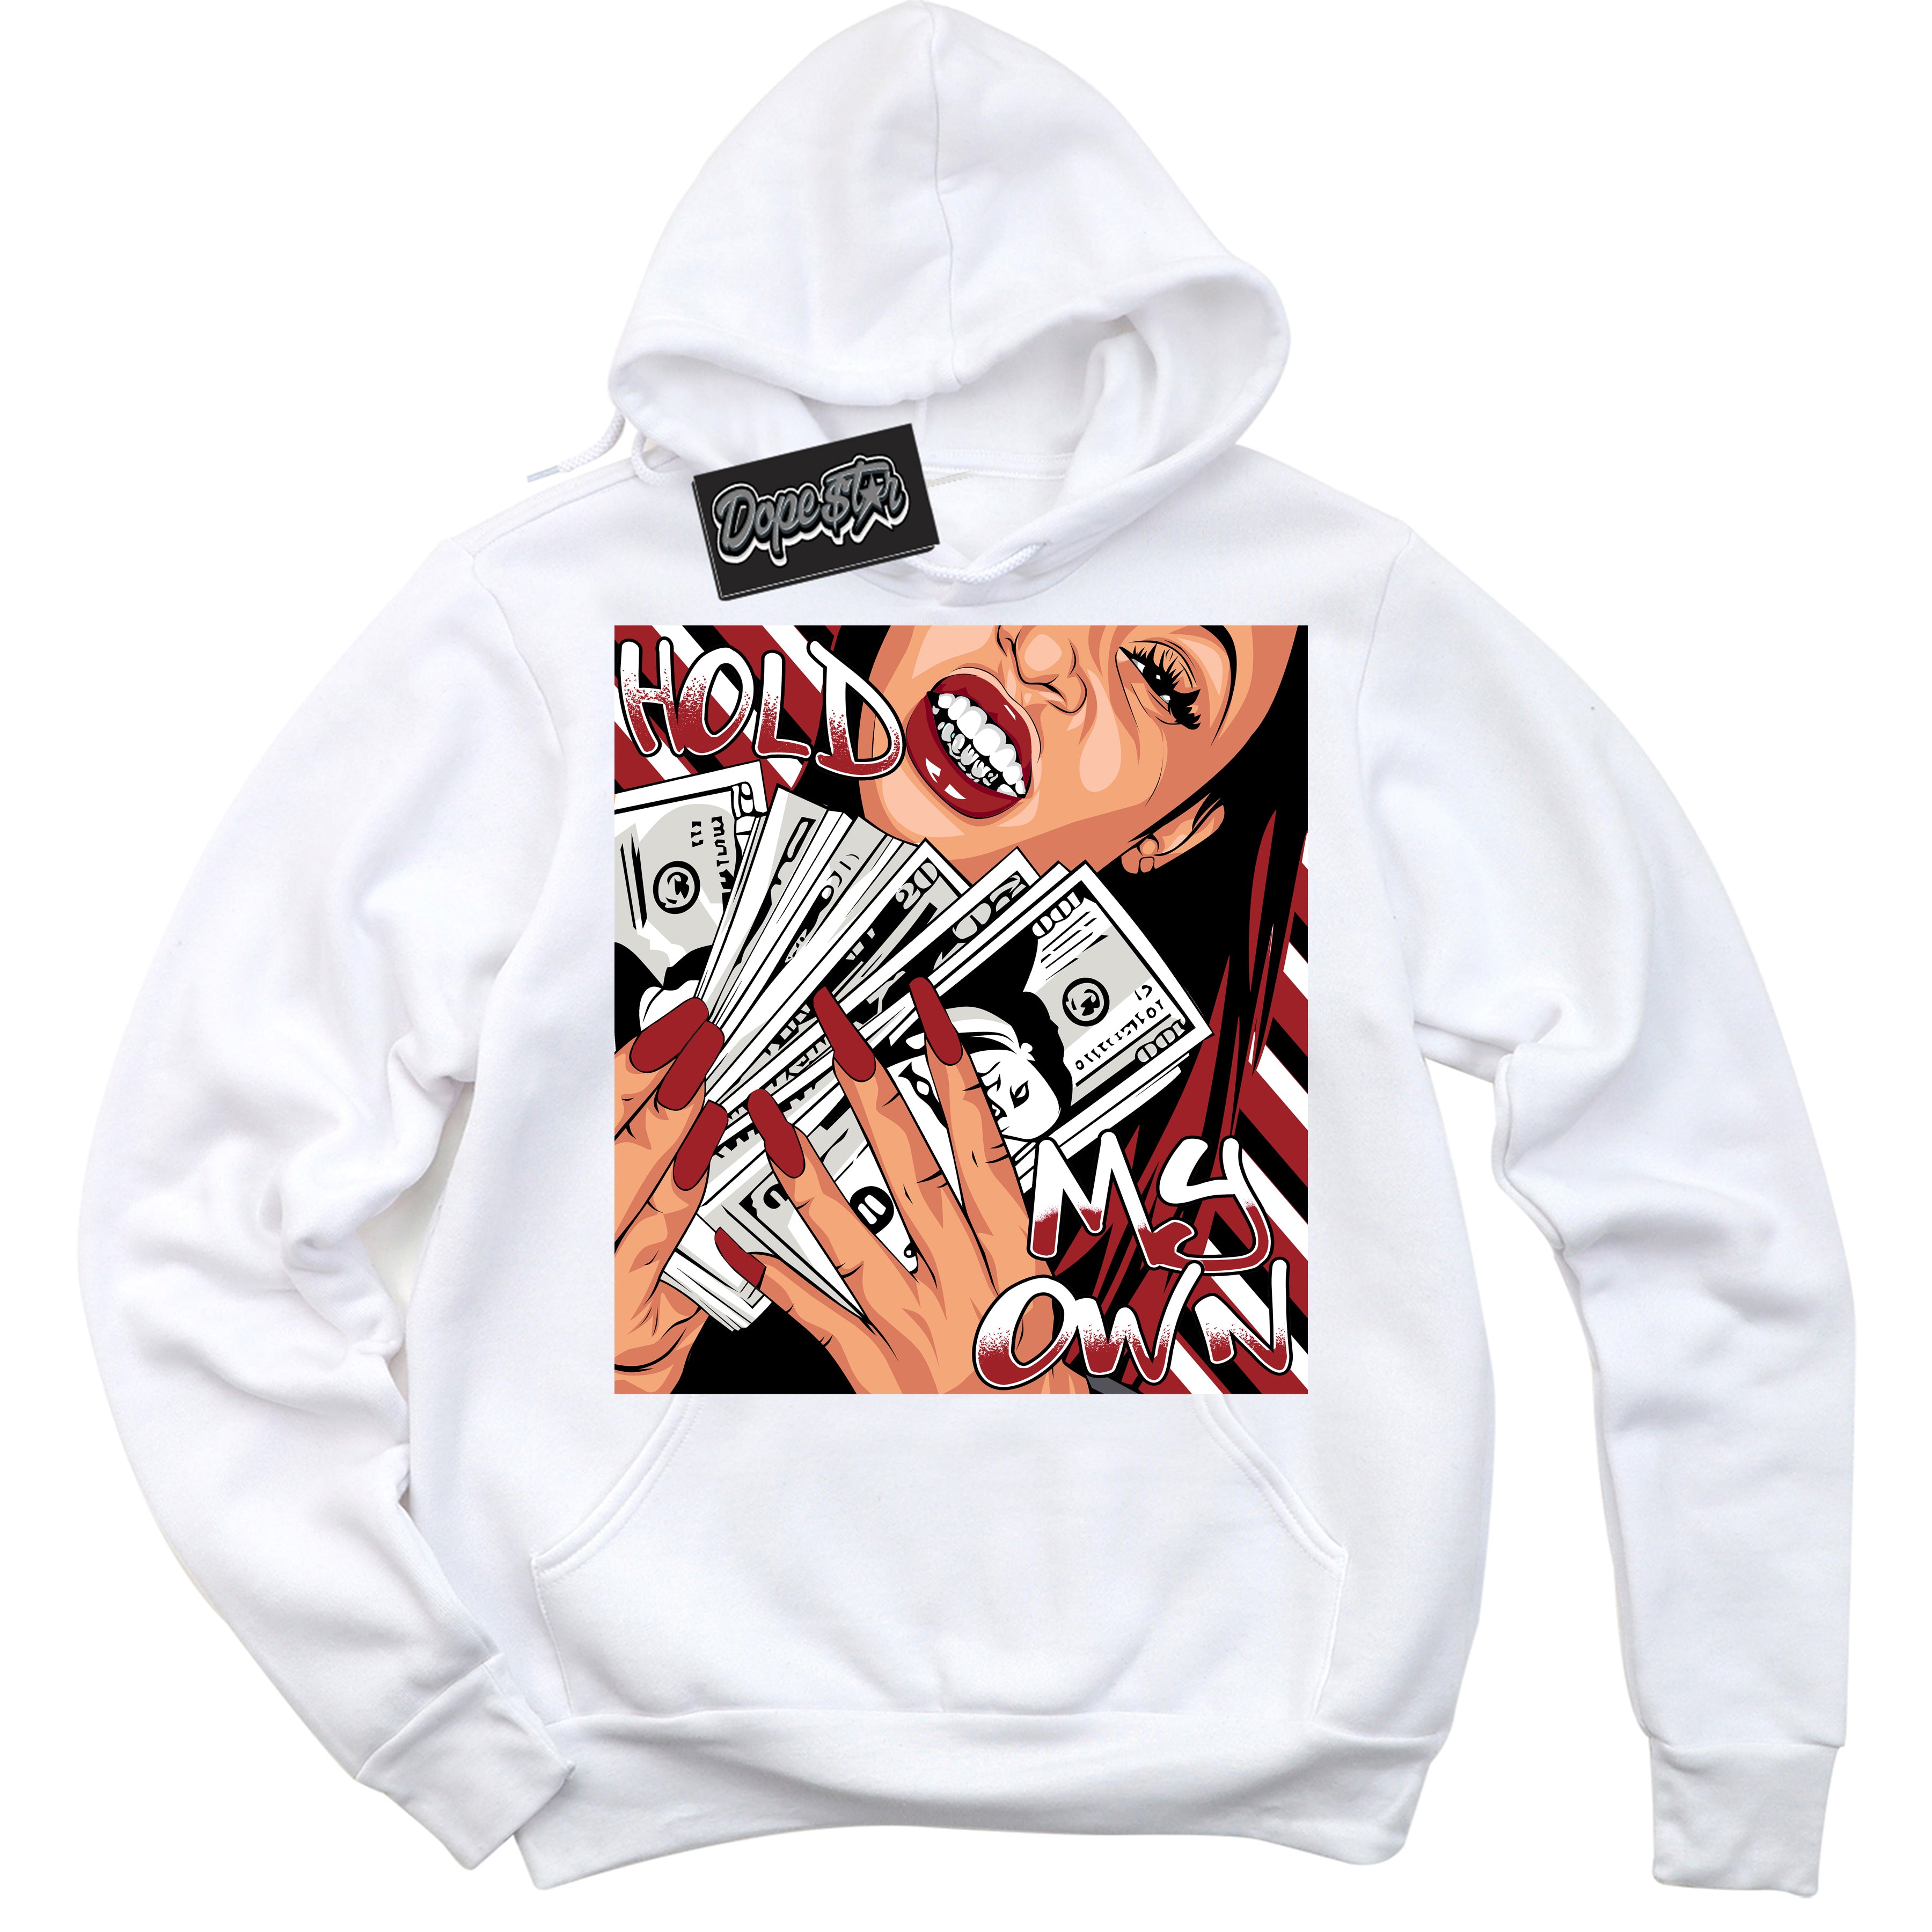 Cool White Hoodie With “ Hold My Own “  Design That Perfectly Matches Lost And Found 1s Sneakers.